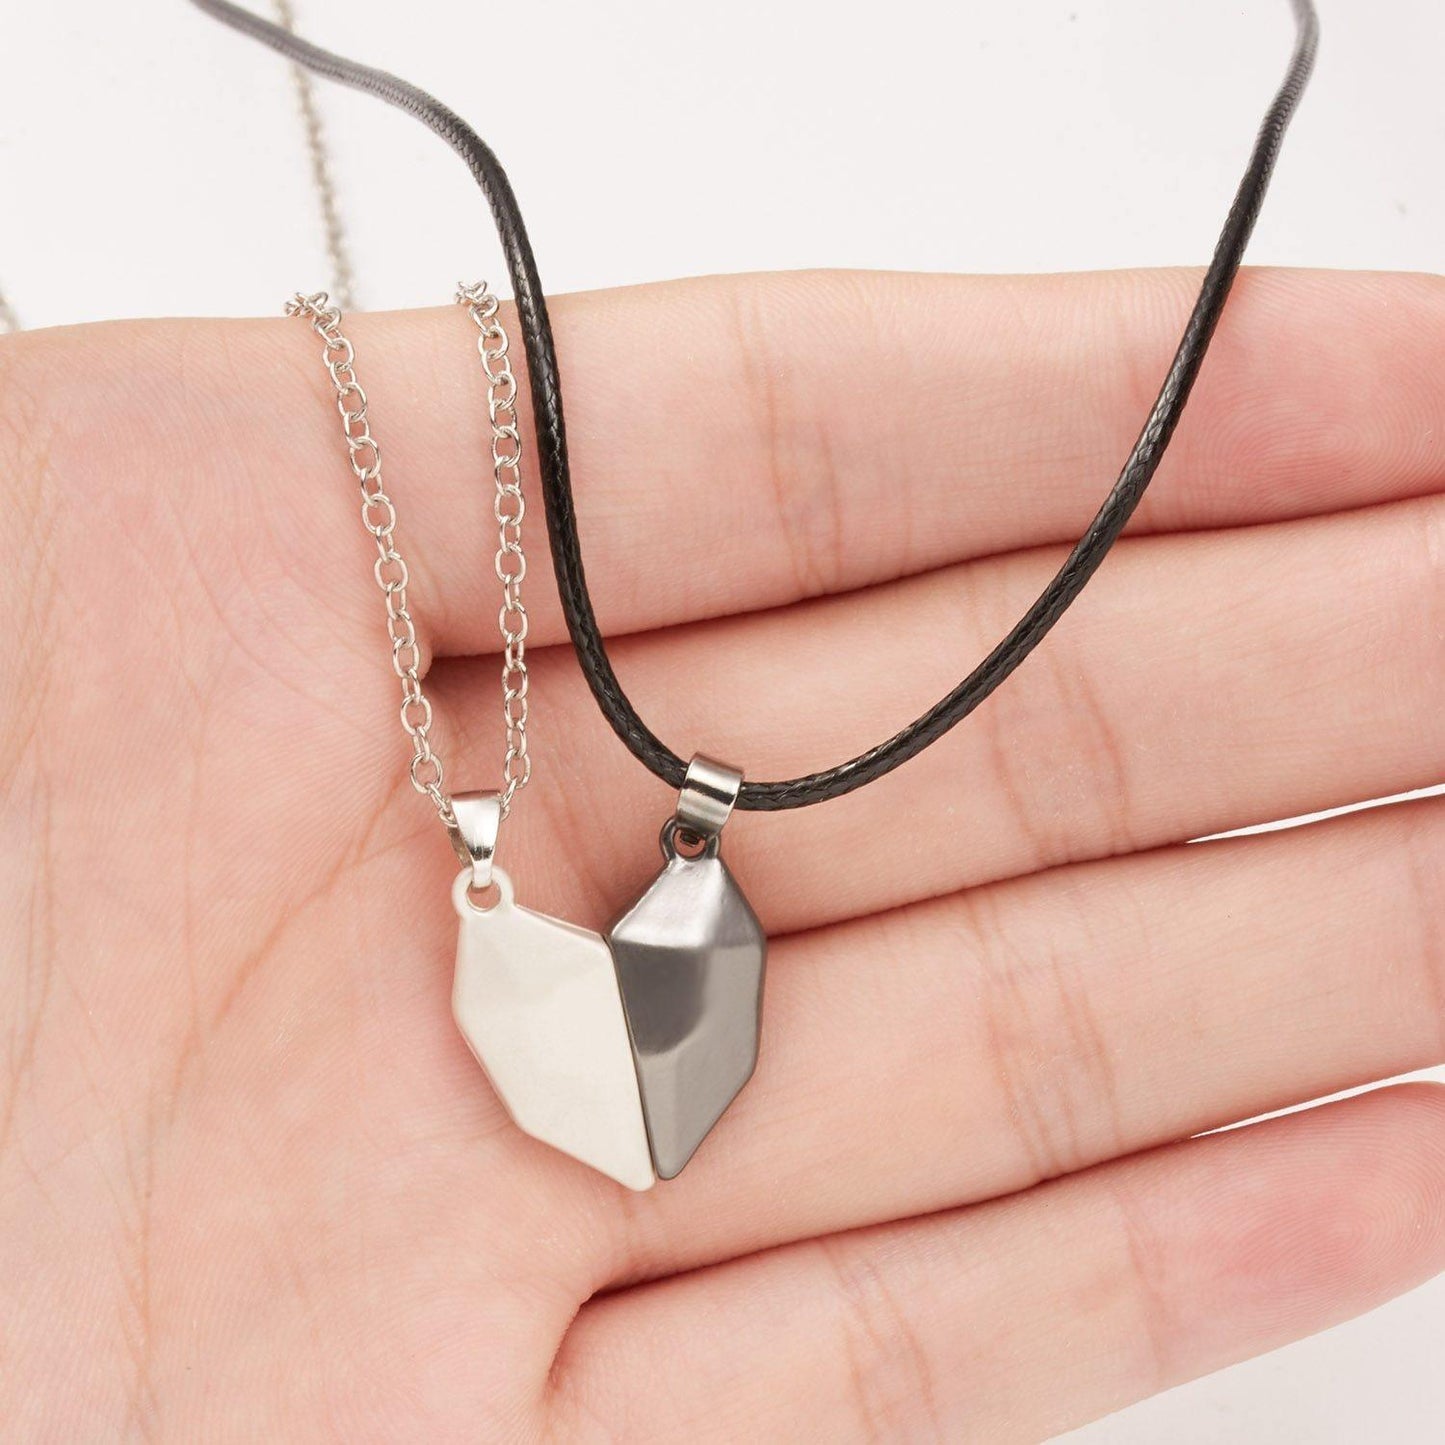 Matching Relationship Necklaces for Couples in 2023 | Matching Relationship Necklaces for Couples - undefined | Couple hugging pendant, Couple Necklace, Gift for Girlfriend, Girlfriend Gifts, girlfriend necklace, Magnetic Couple Necklace, to my girlfriend | From Hunny Life | hunnylife.com